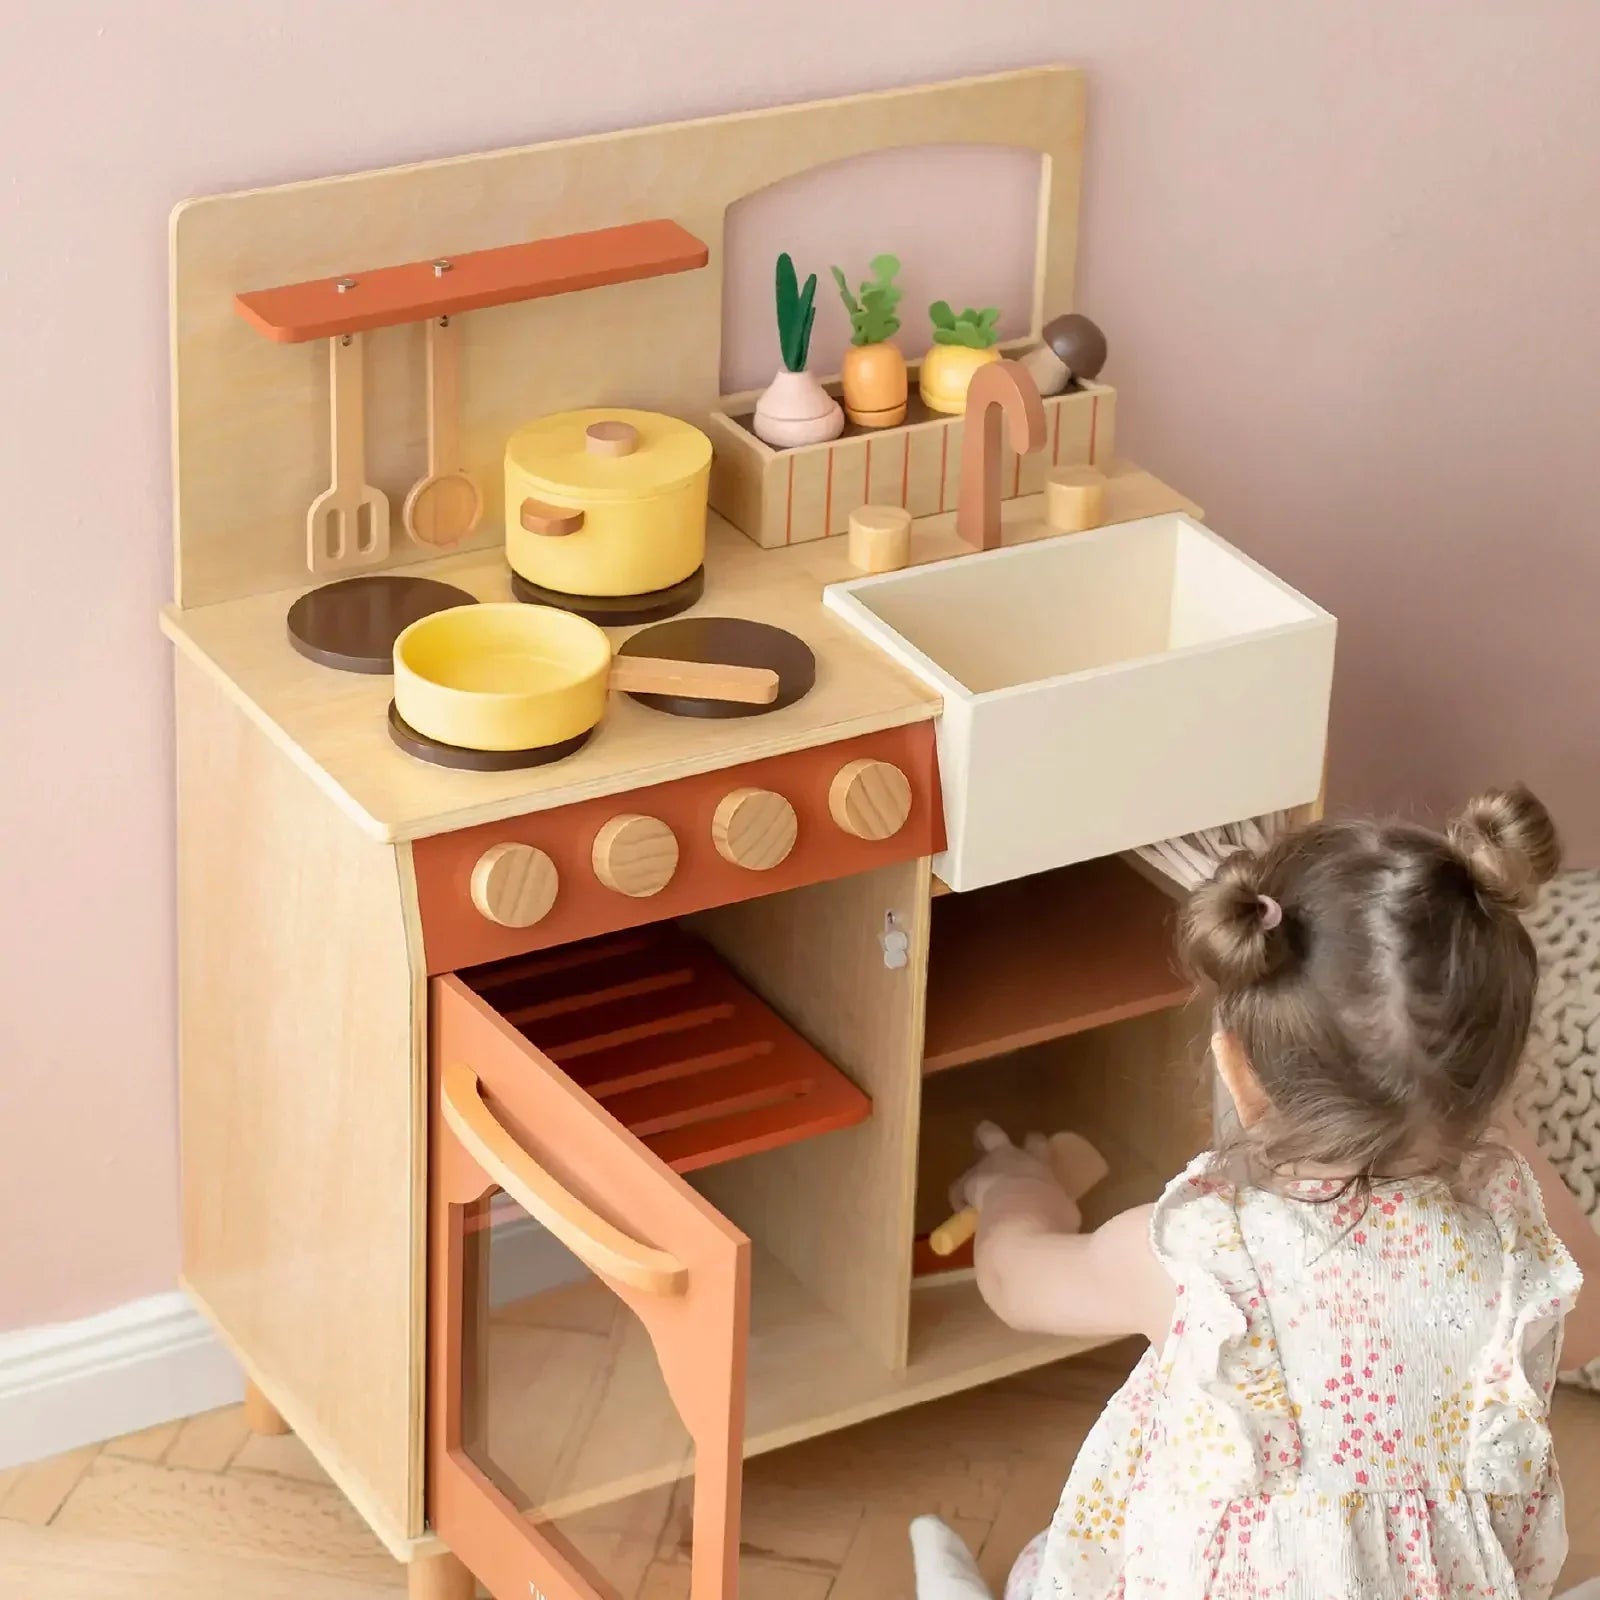 Tiny Land Play Kitchen for Kids, Toy Kitchen Set with Plenty of Play  Features, New Modern Kids Wooden Play Kitchen Designed in Trendy Home Style  with